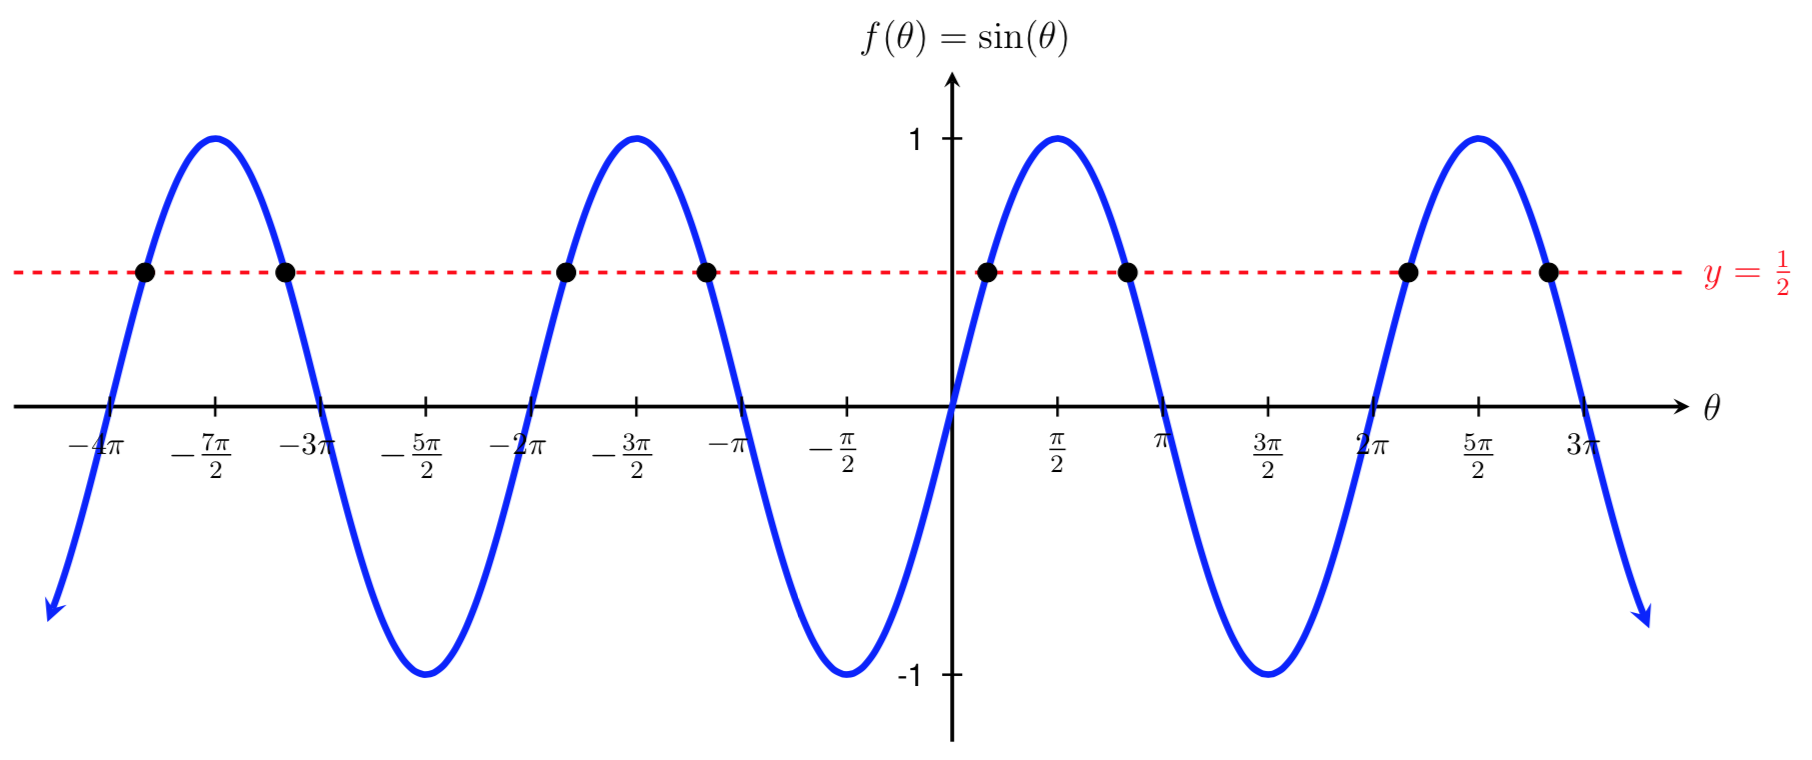 graph of sin(t)=1/2